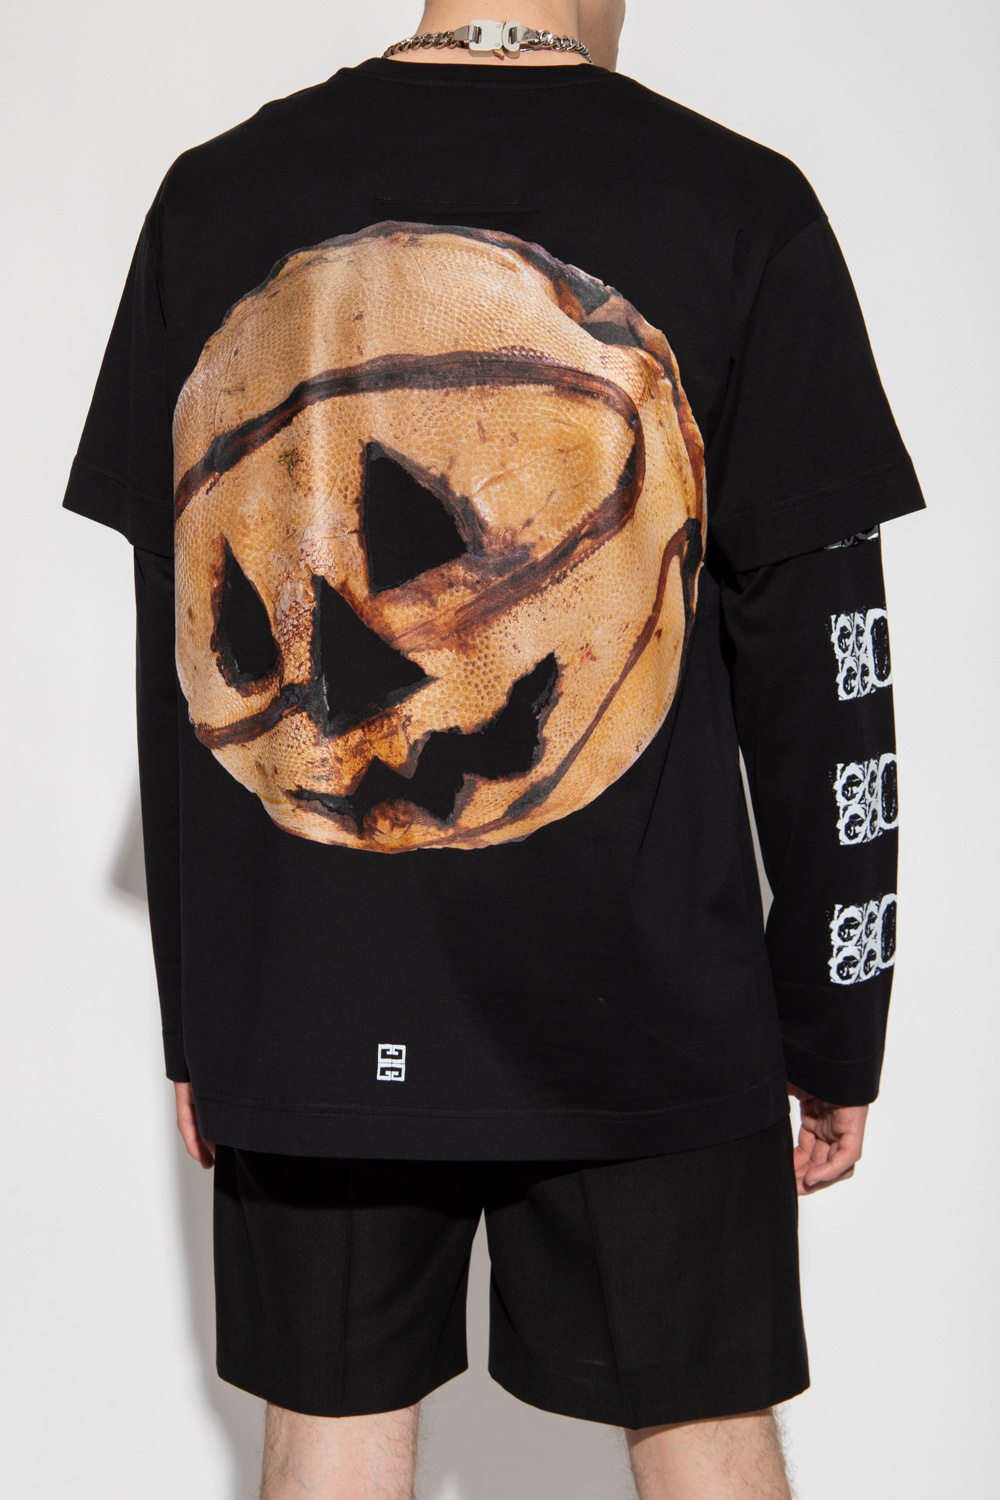 Givenchy x Josh Smith 4G Skull T-Shirt - Men from Brother2Brother UK